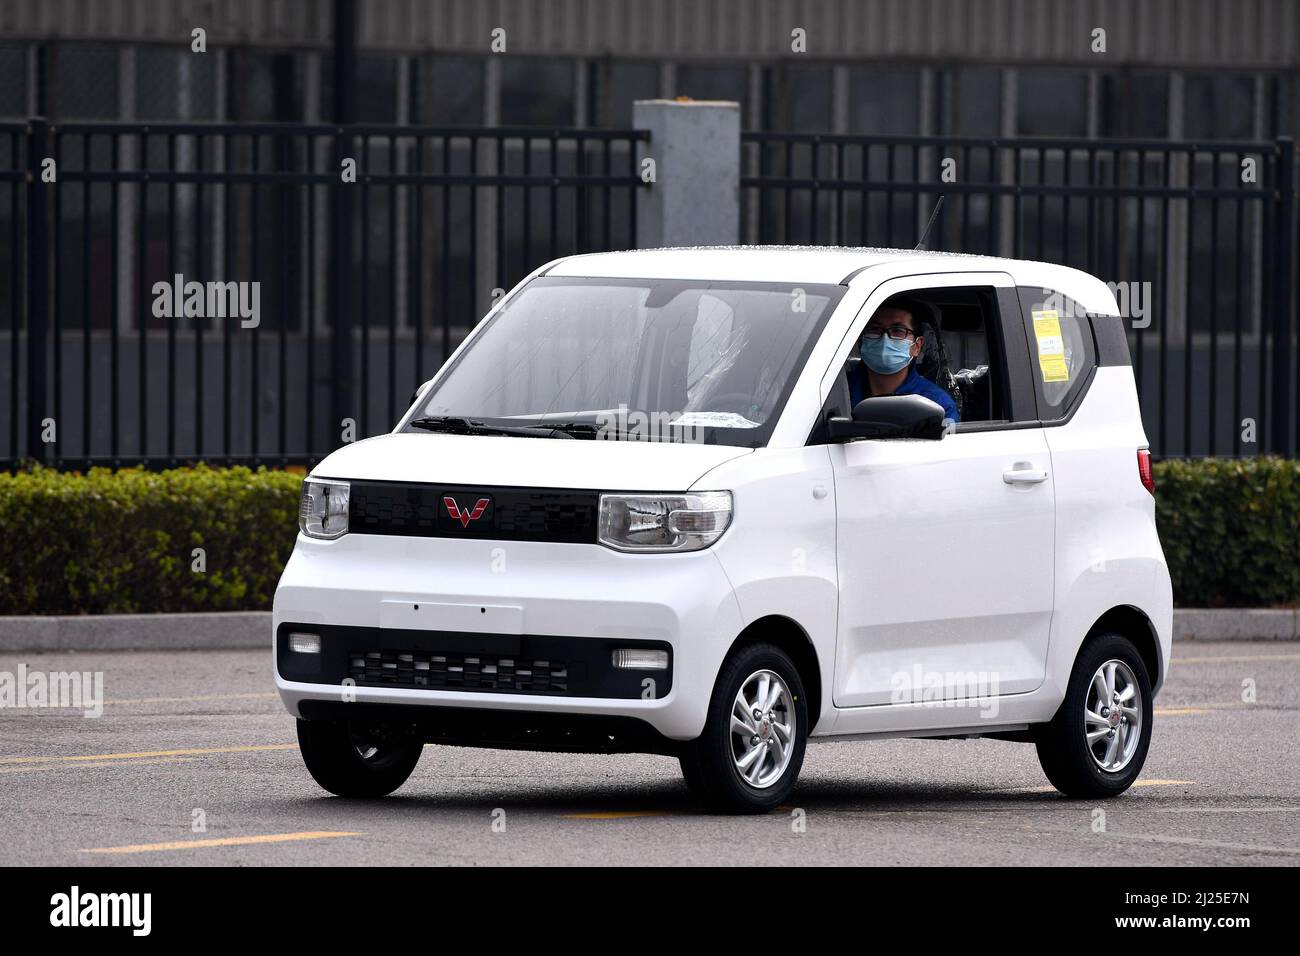 QINGDAO, CHINA - MARCH 30, 2022 - A new energy vehicle is seen at the Qingdao branch of SAIC-GM-Wuling Automobile Co., LTD in Qingdao, East China's Sh Stock Photo